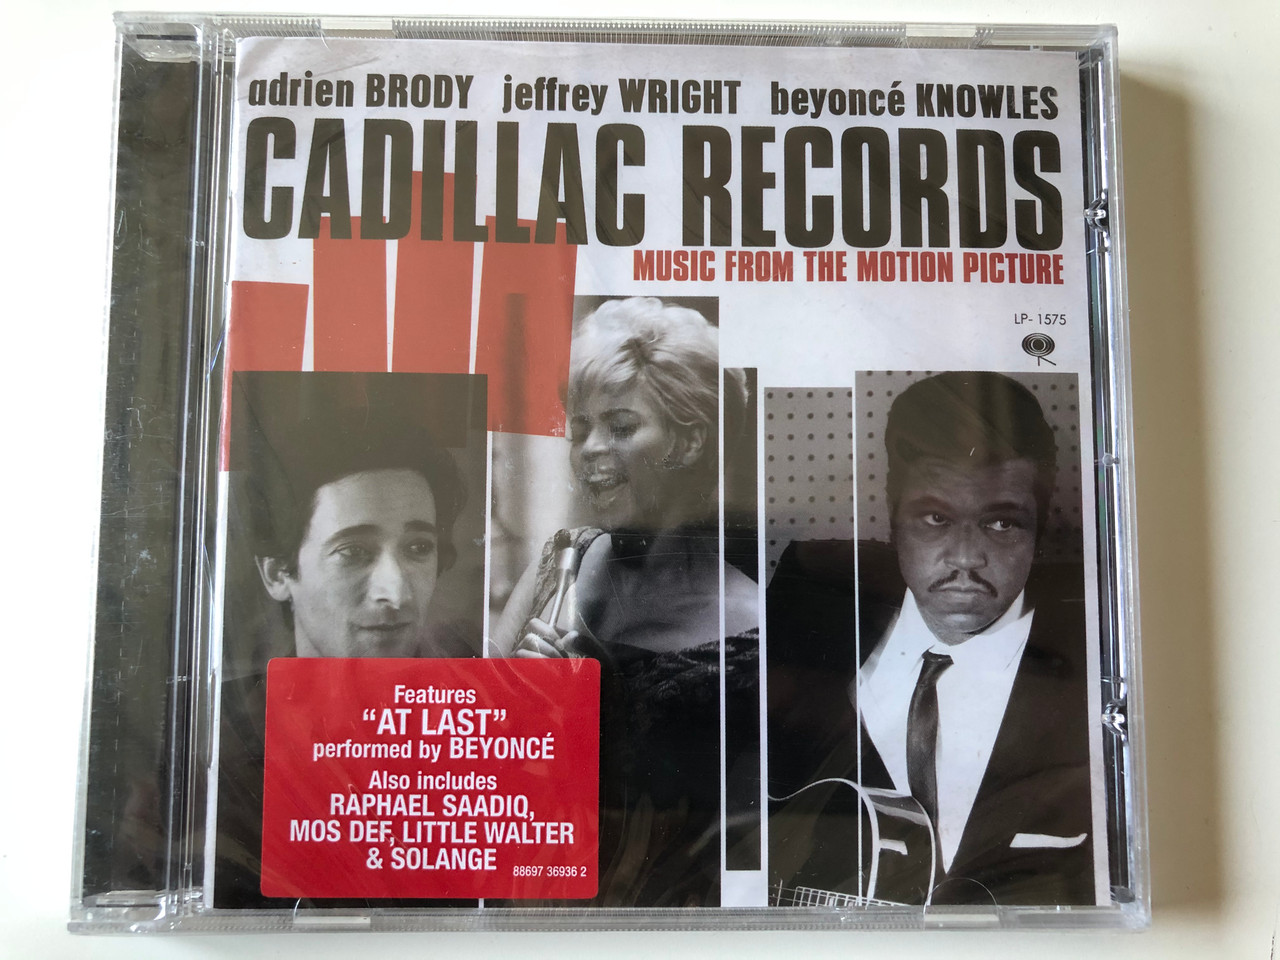 Adrien Brody, Jeffrey Wright, Beyonce Knowles - Cadillac Records (Music  From The Motion Picture) / Featuring ''At Last'', Perfordmed by Beyonce,  Also includes Raphael Saadiq, Mos Def / Sony Music Entertainment Audio CD  2008 / 88697 36936 2 ...